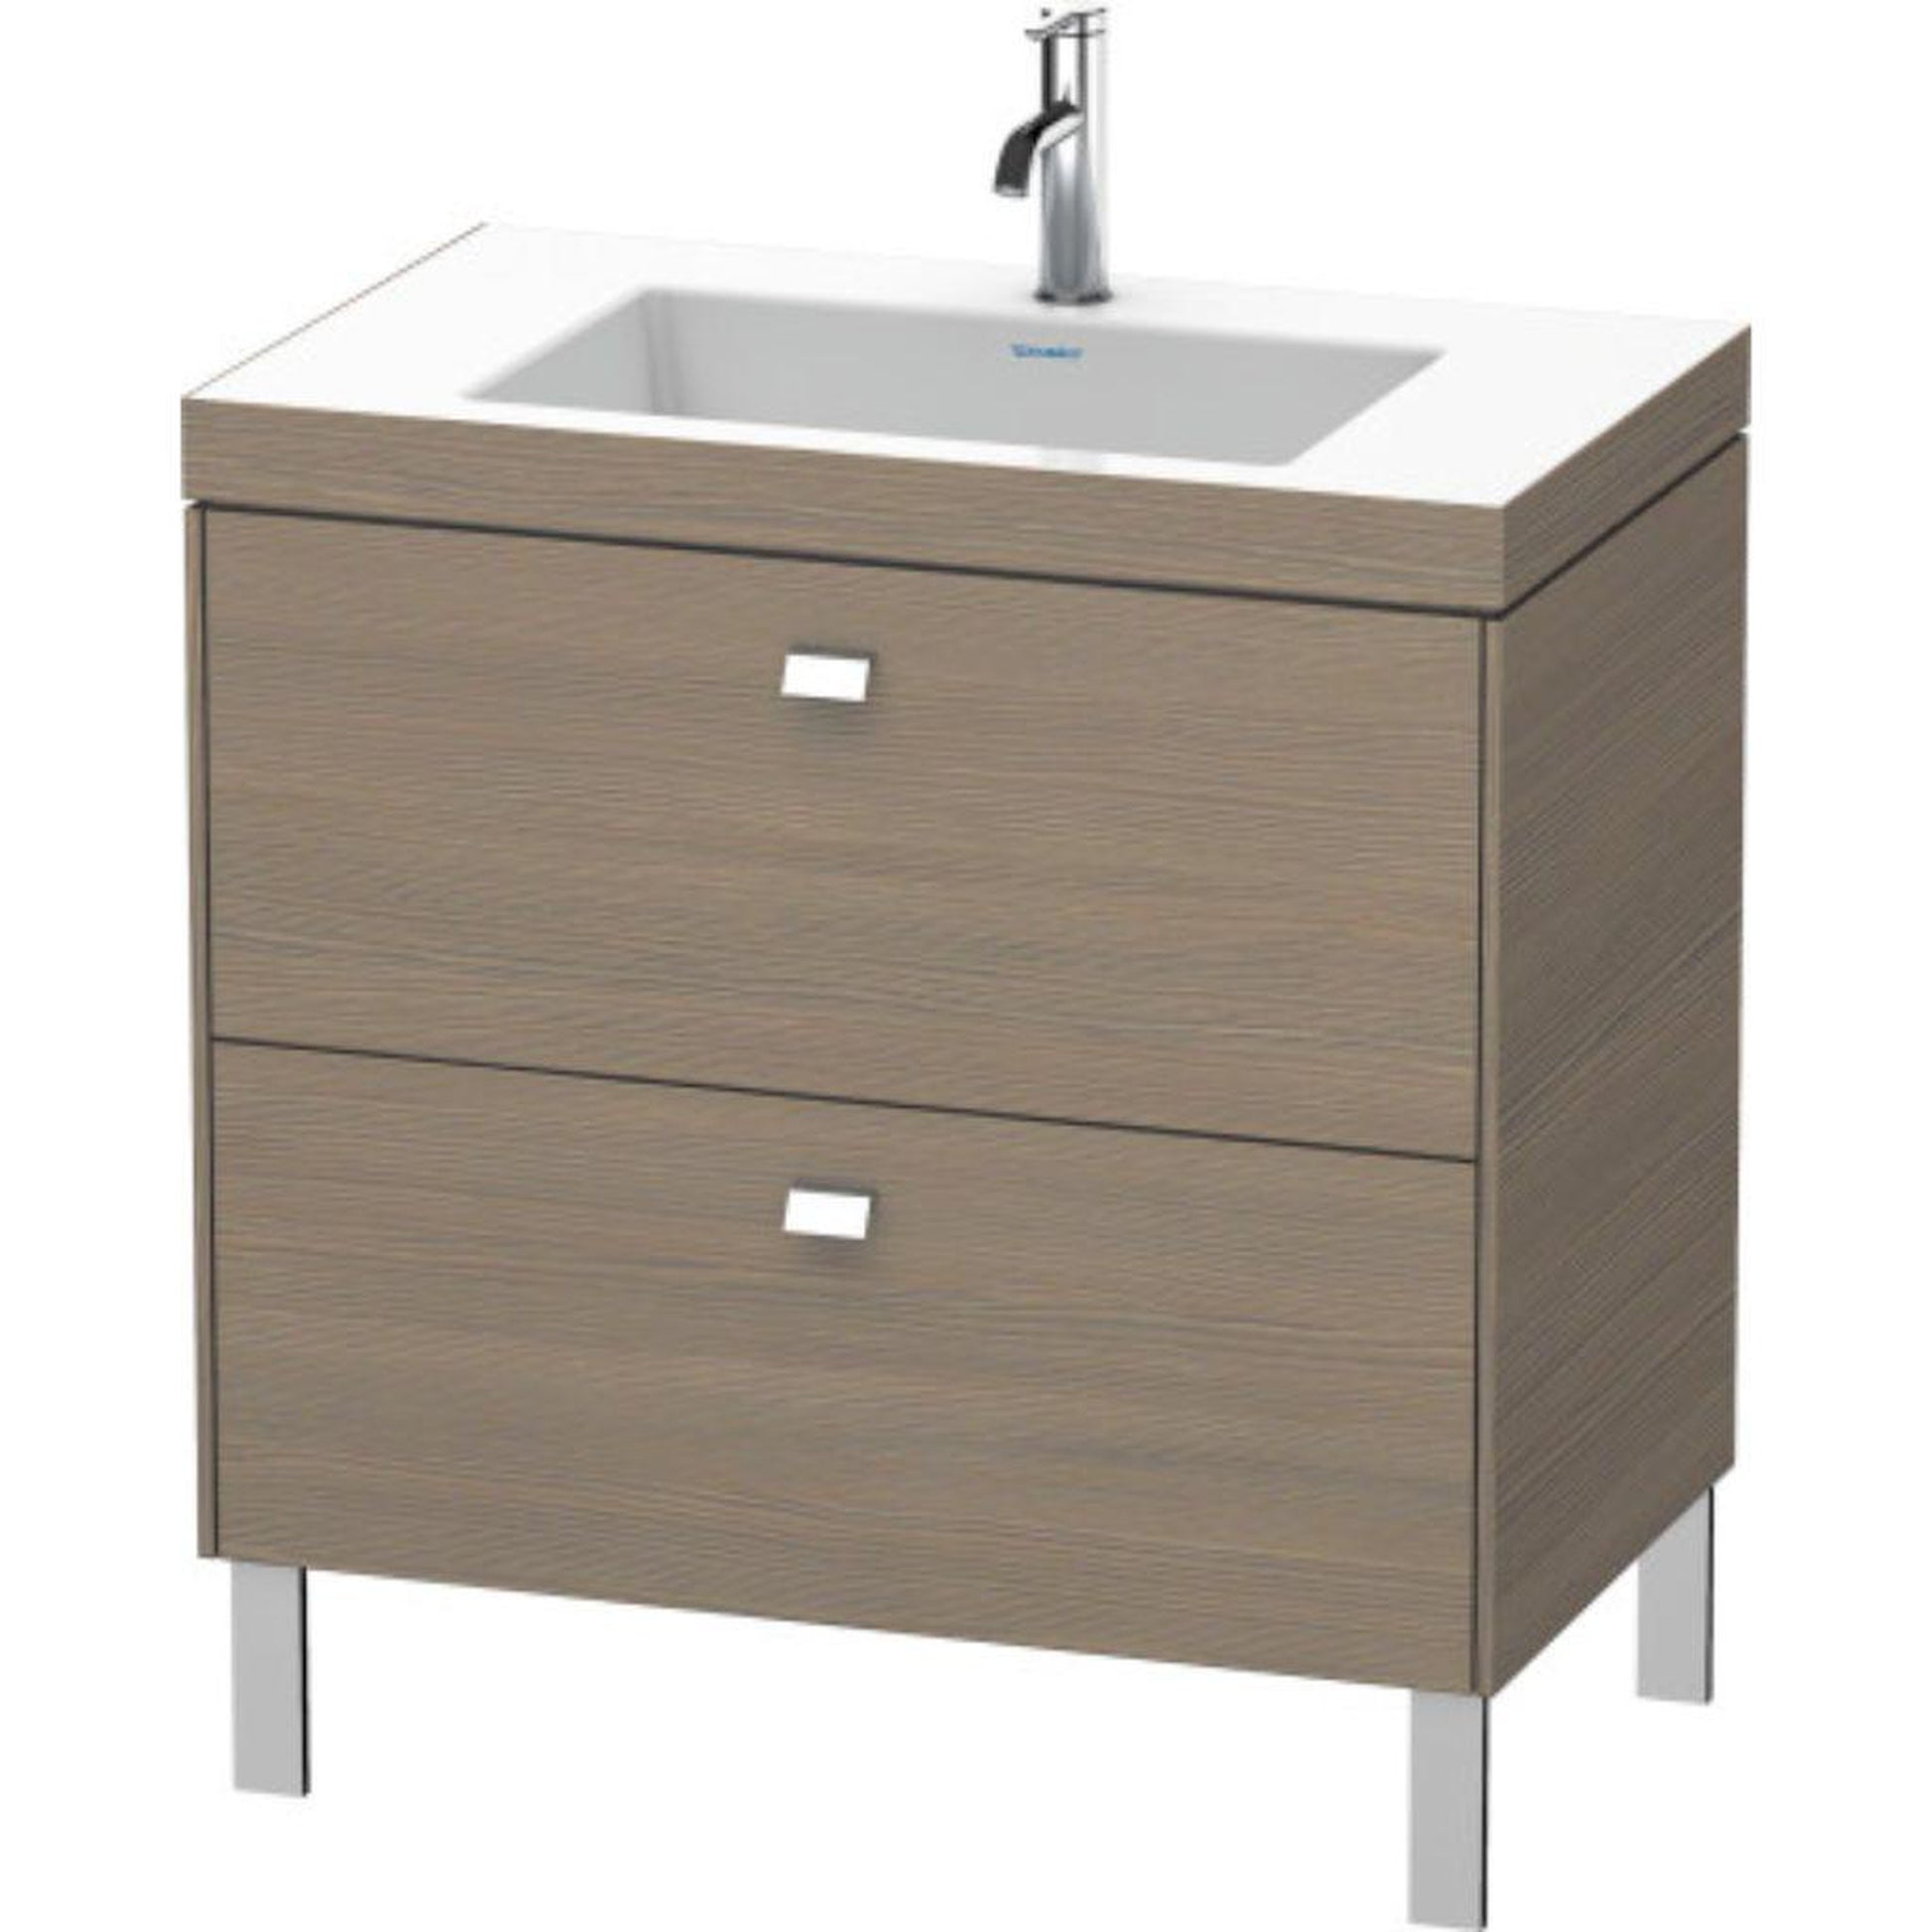 Duravit Brioso 31" x 28" x 19" Two Drawer C-Bonded Floor Standing Vanity Kit With One Tap Hole in Oak Terra and Chrome Handle